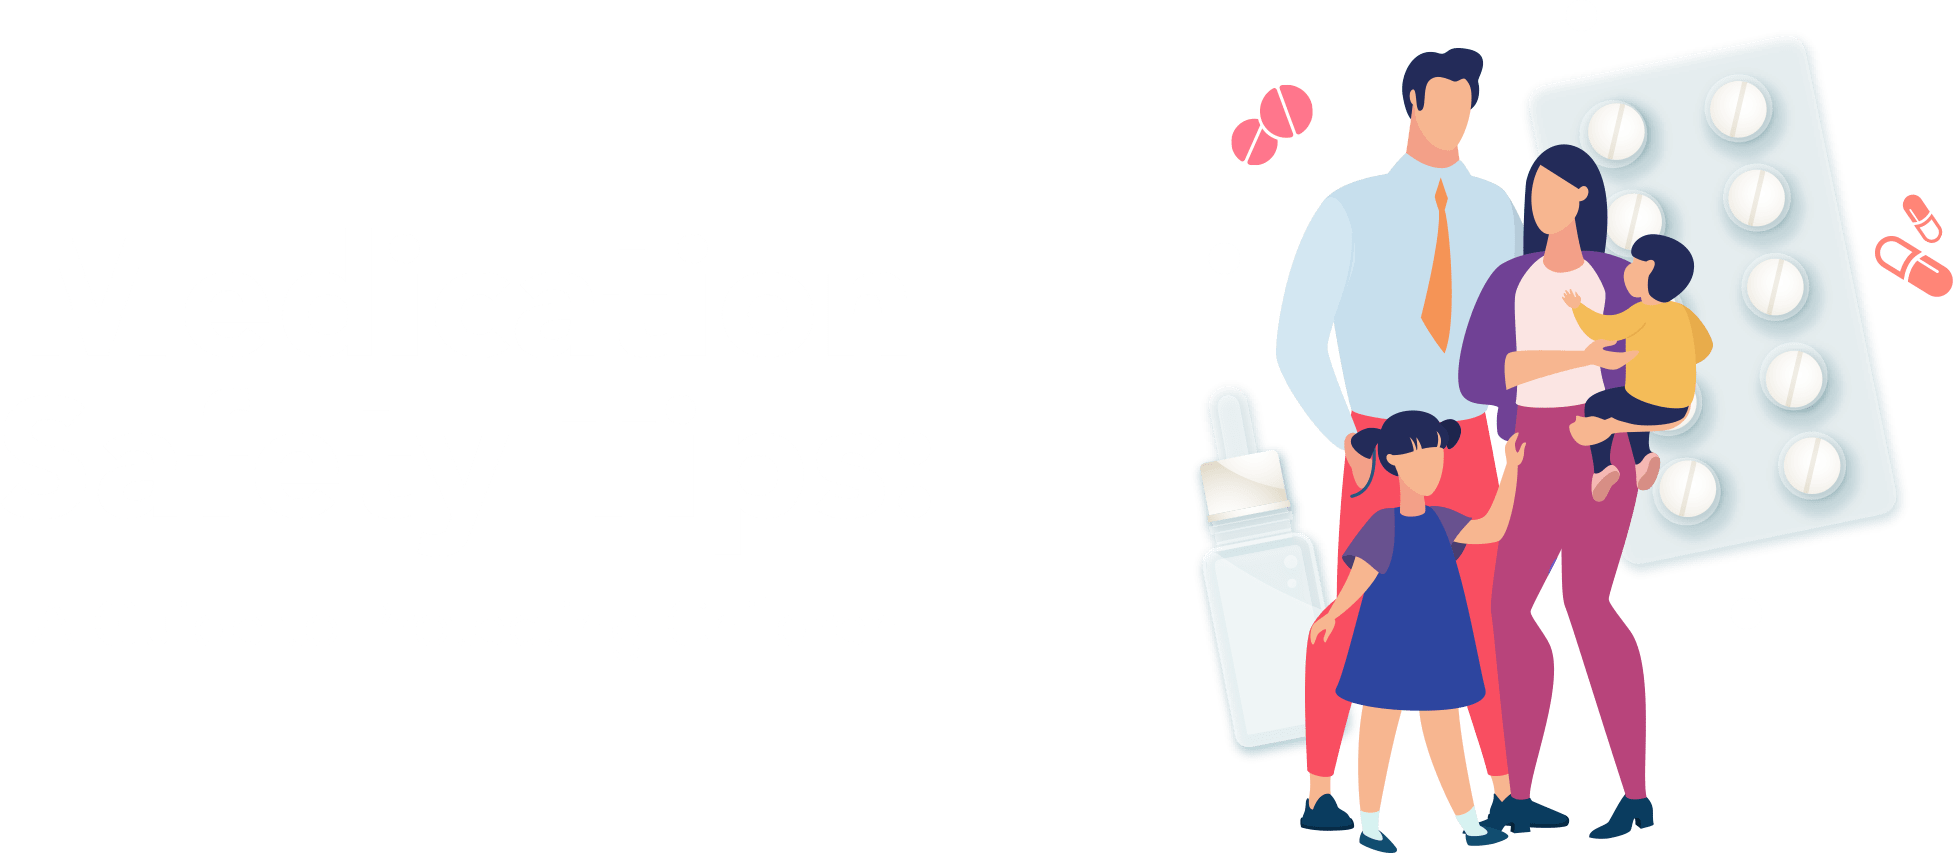 Medication Safety Tips: A Guide to Protecting Children